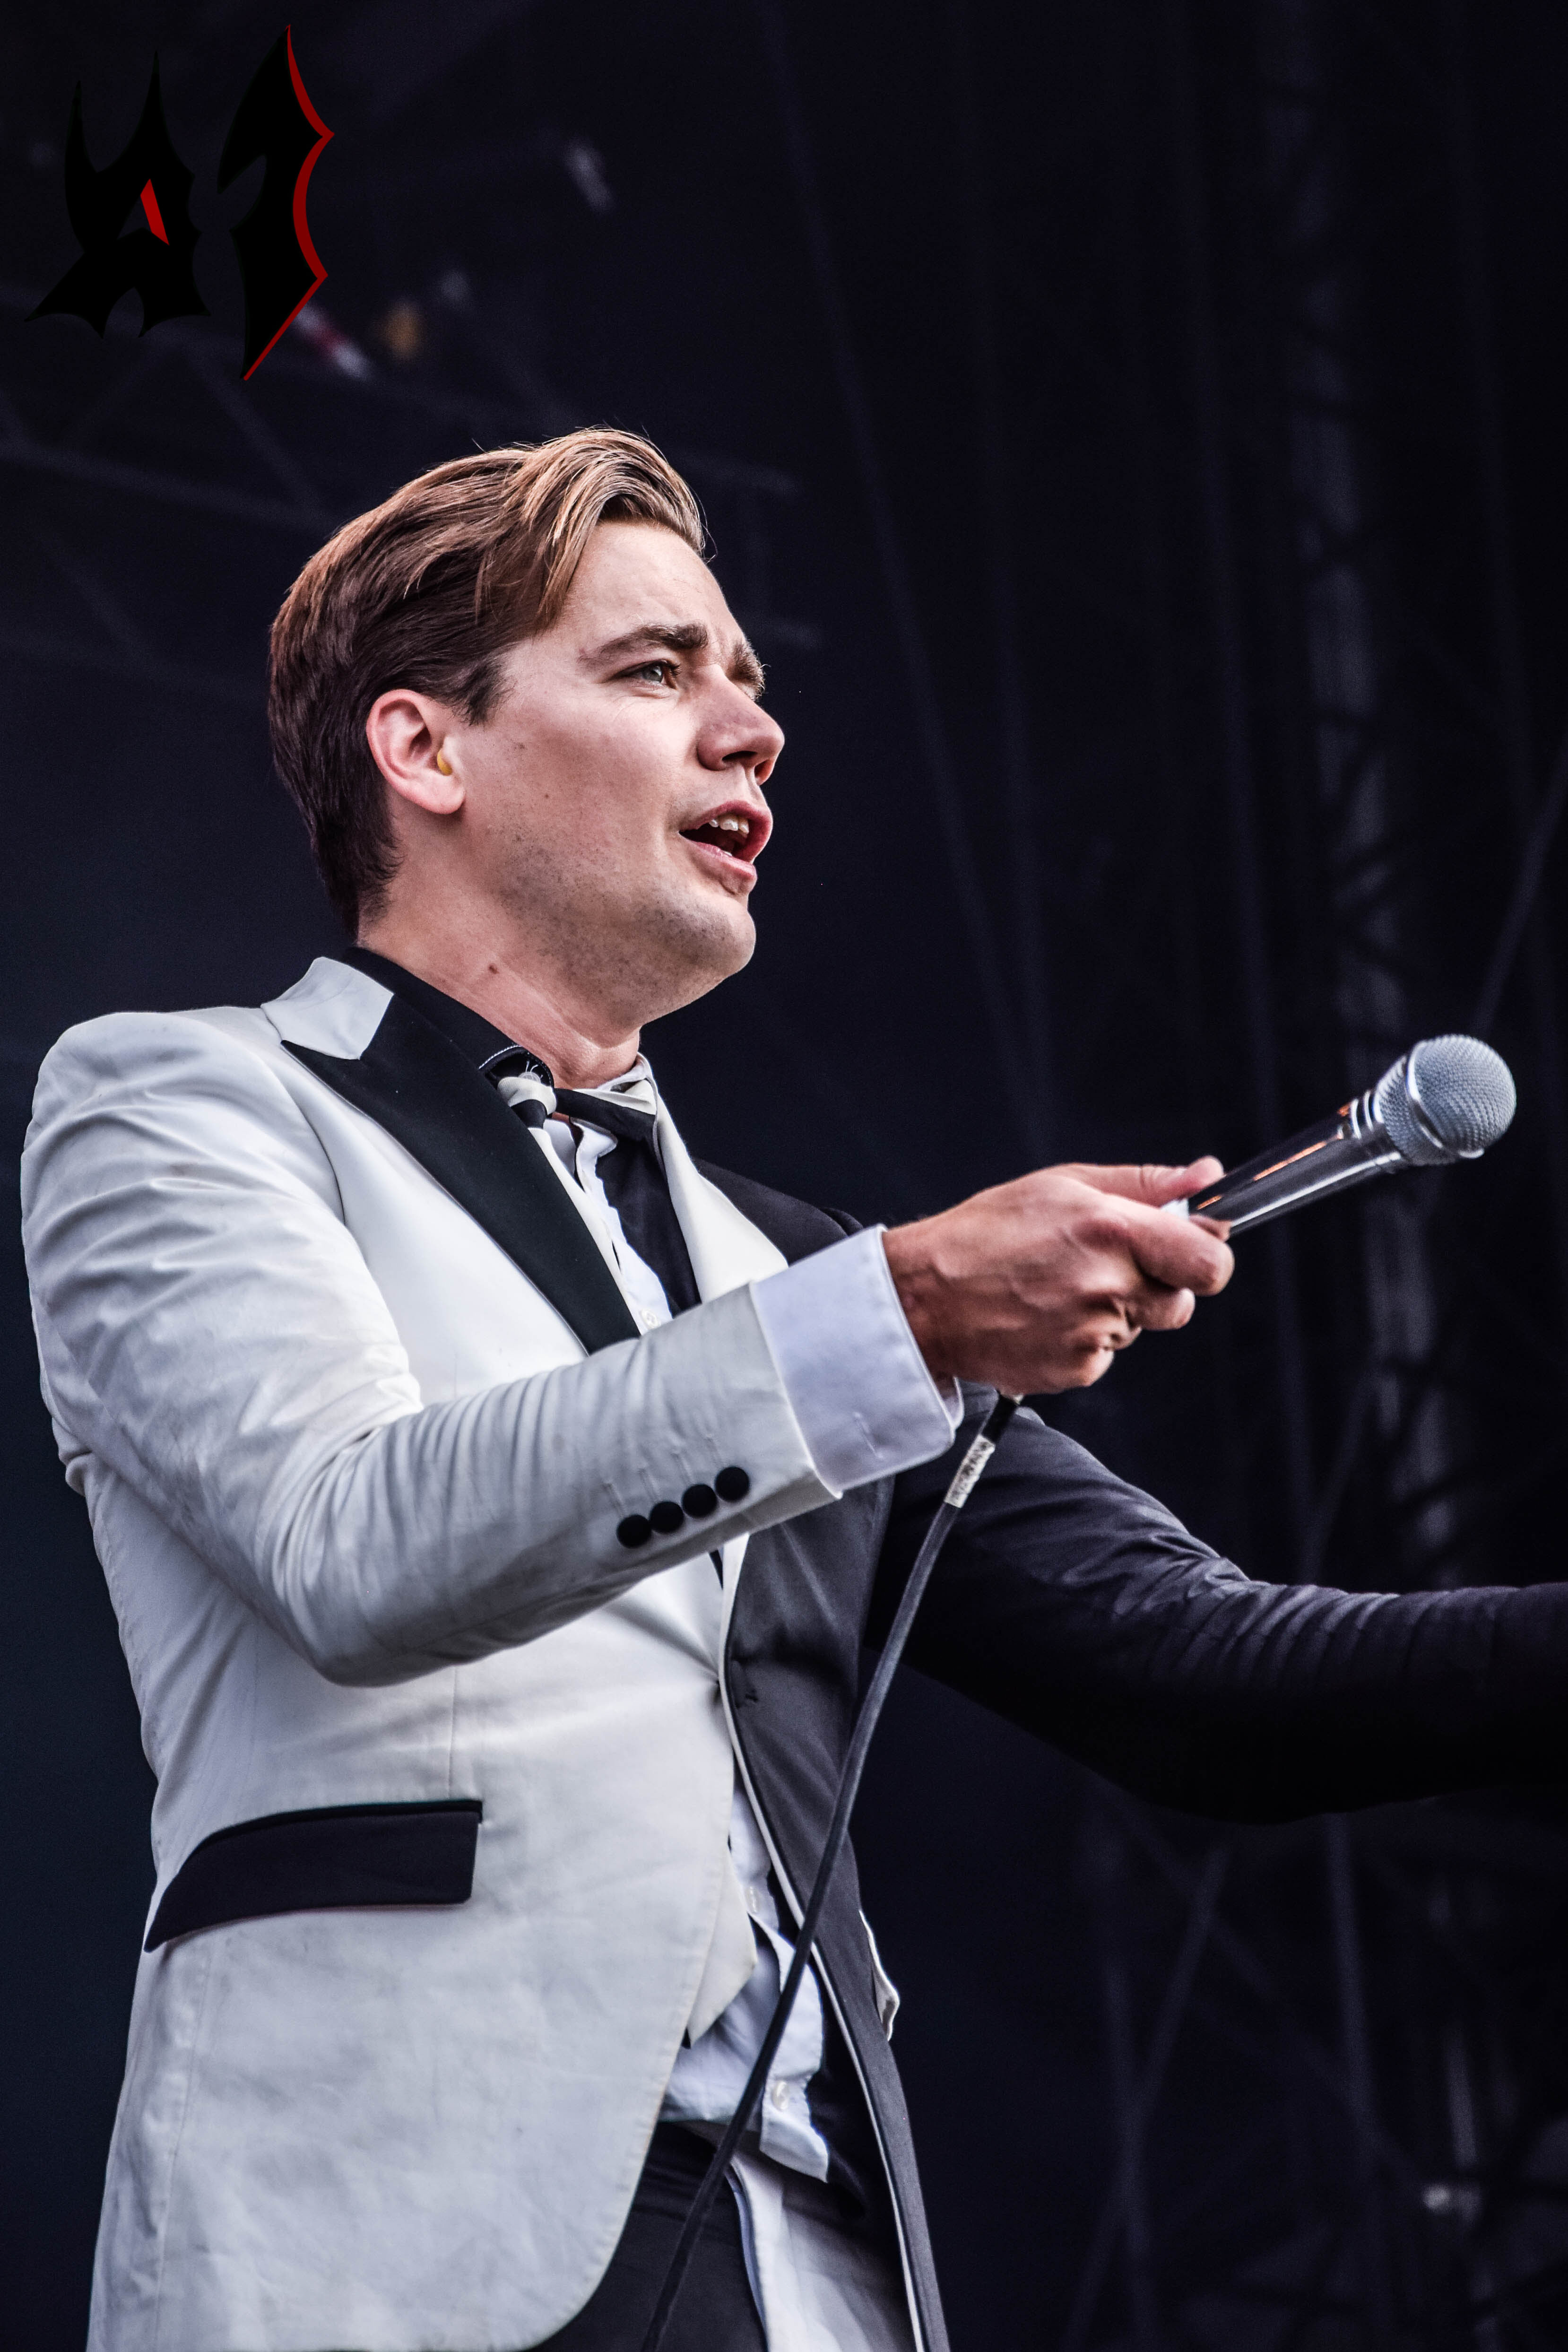 Donwload 2018 – Day 3 - The Hives 22